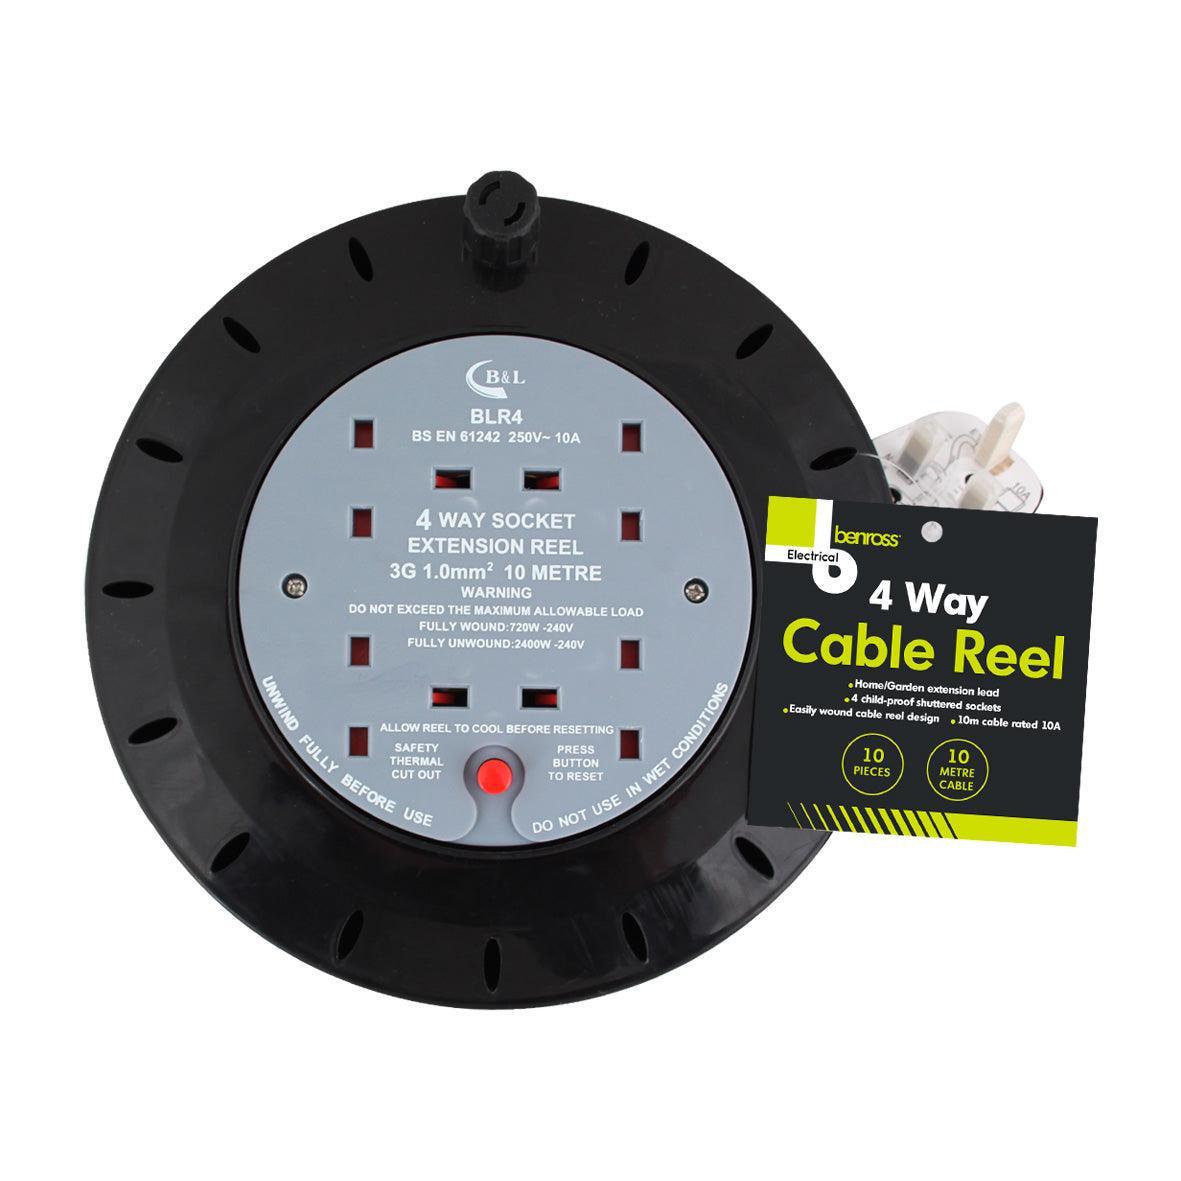 Benross 4 Way Cable Reel | 10m - Choice Stores